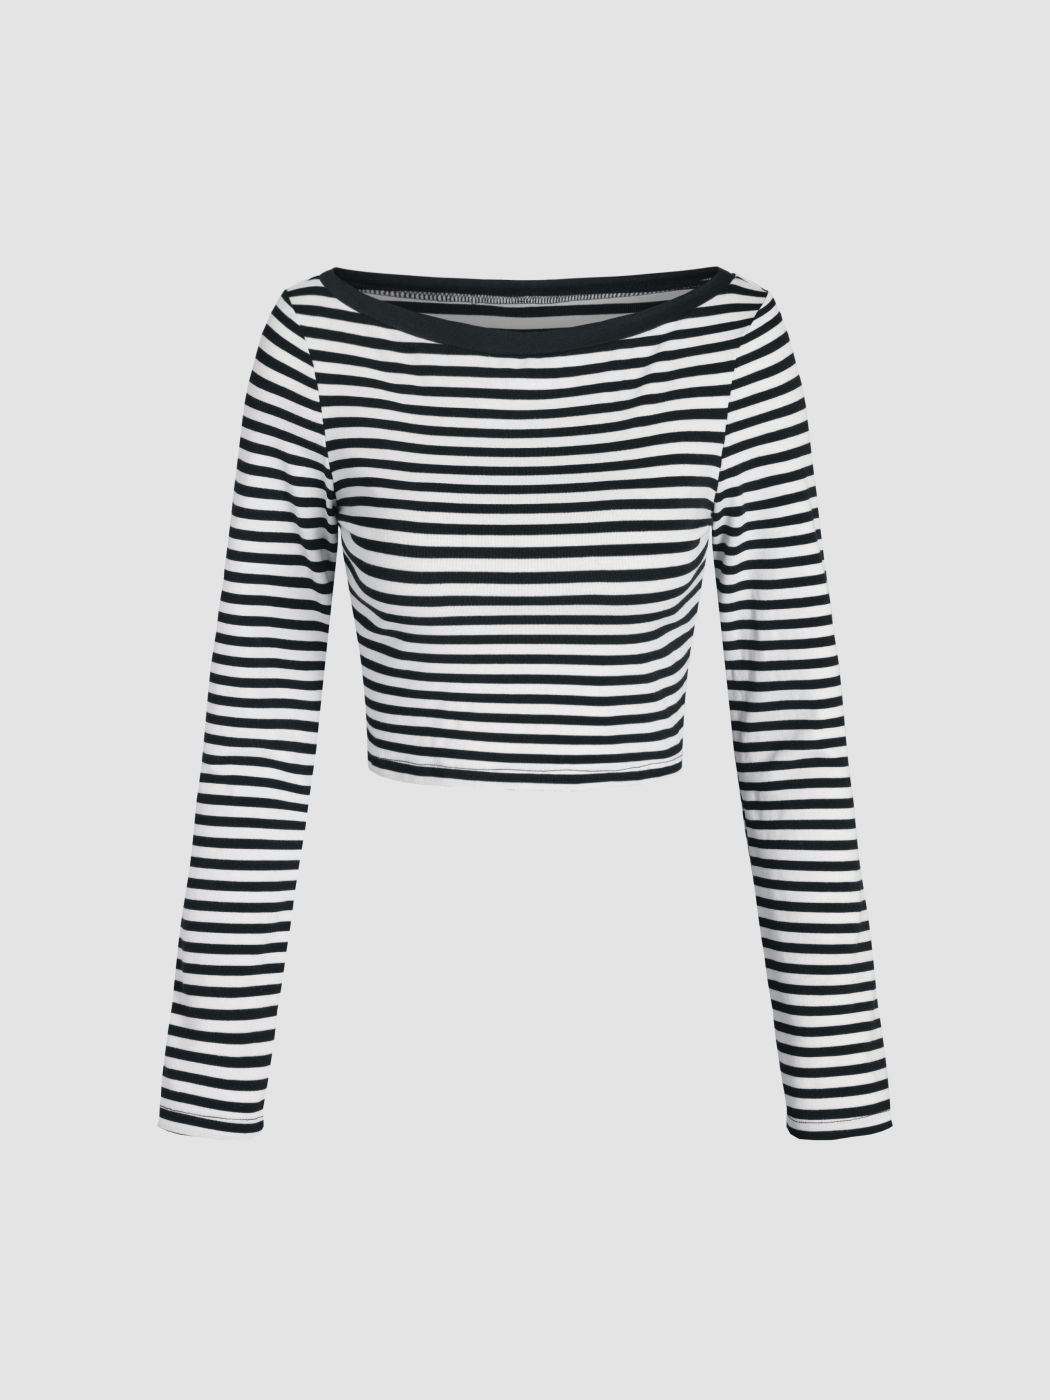 Striped Long Sleeve Top - Cider